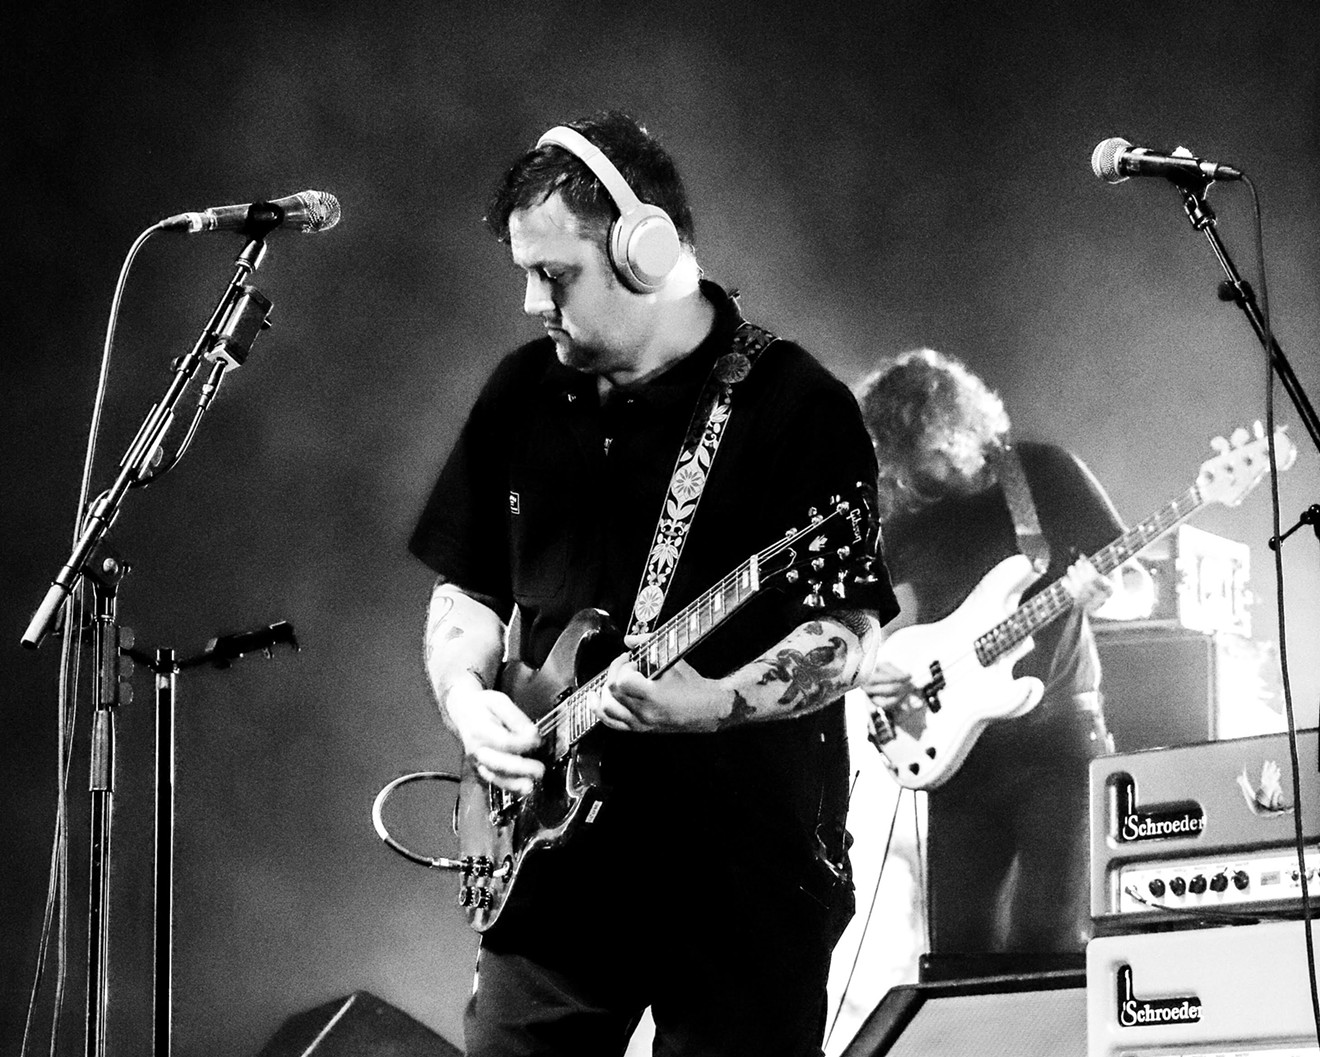 Modest Mouse brings The Lonesome Crowded West tour to the South Side Ballroom on Wednesday night.